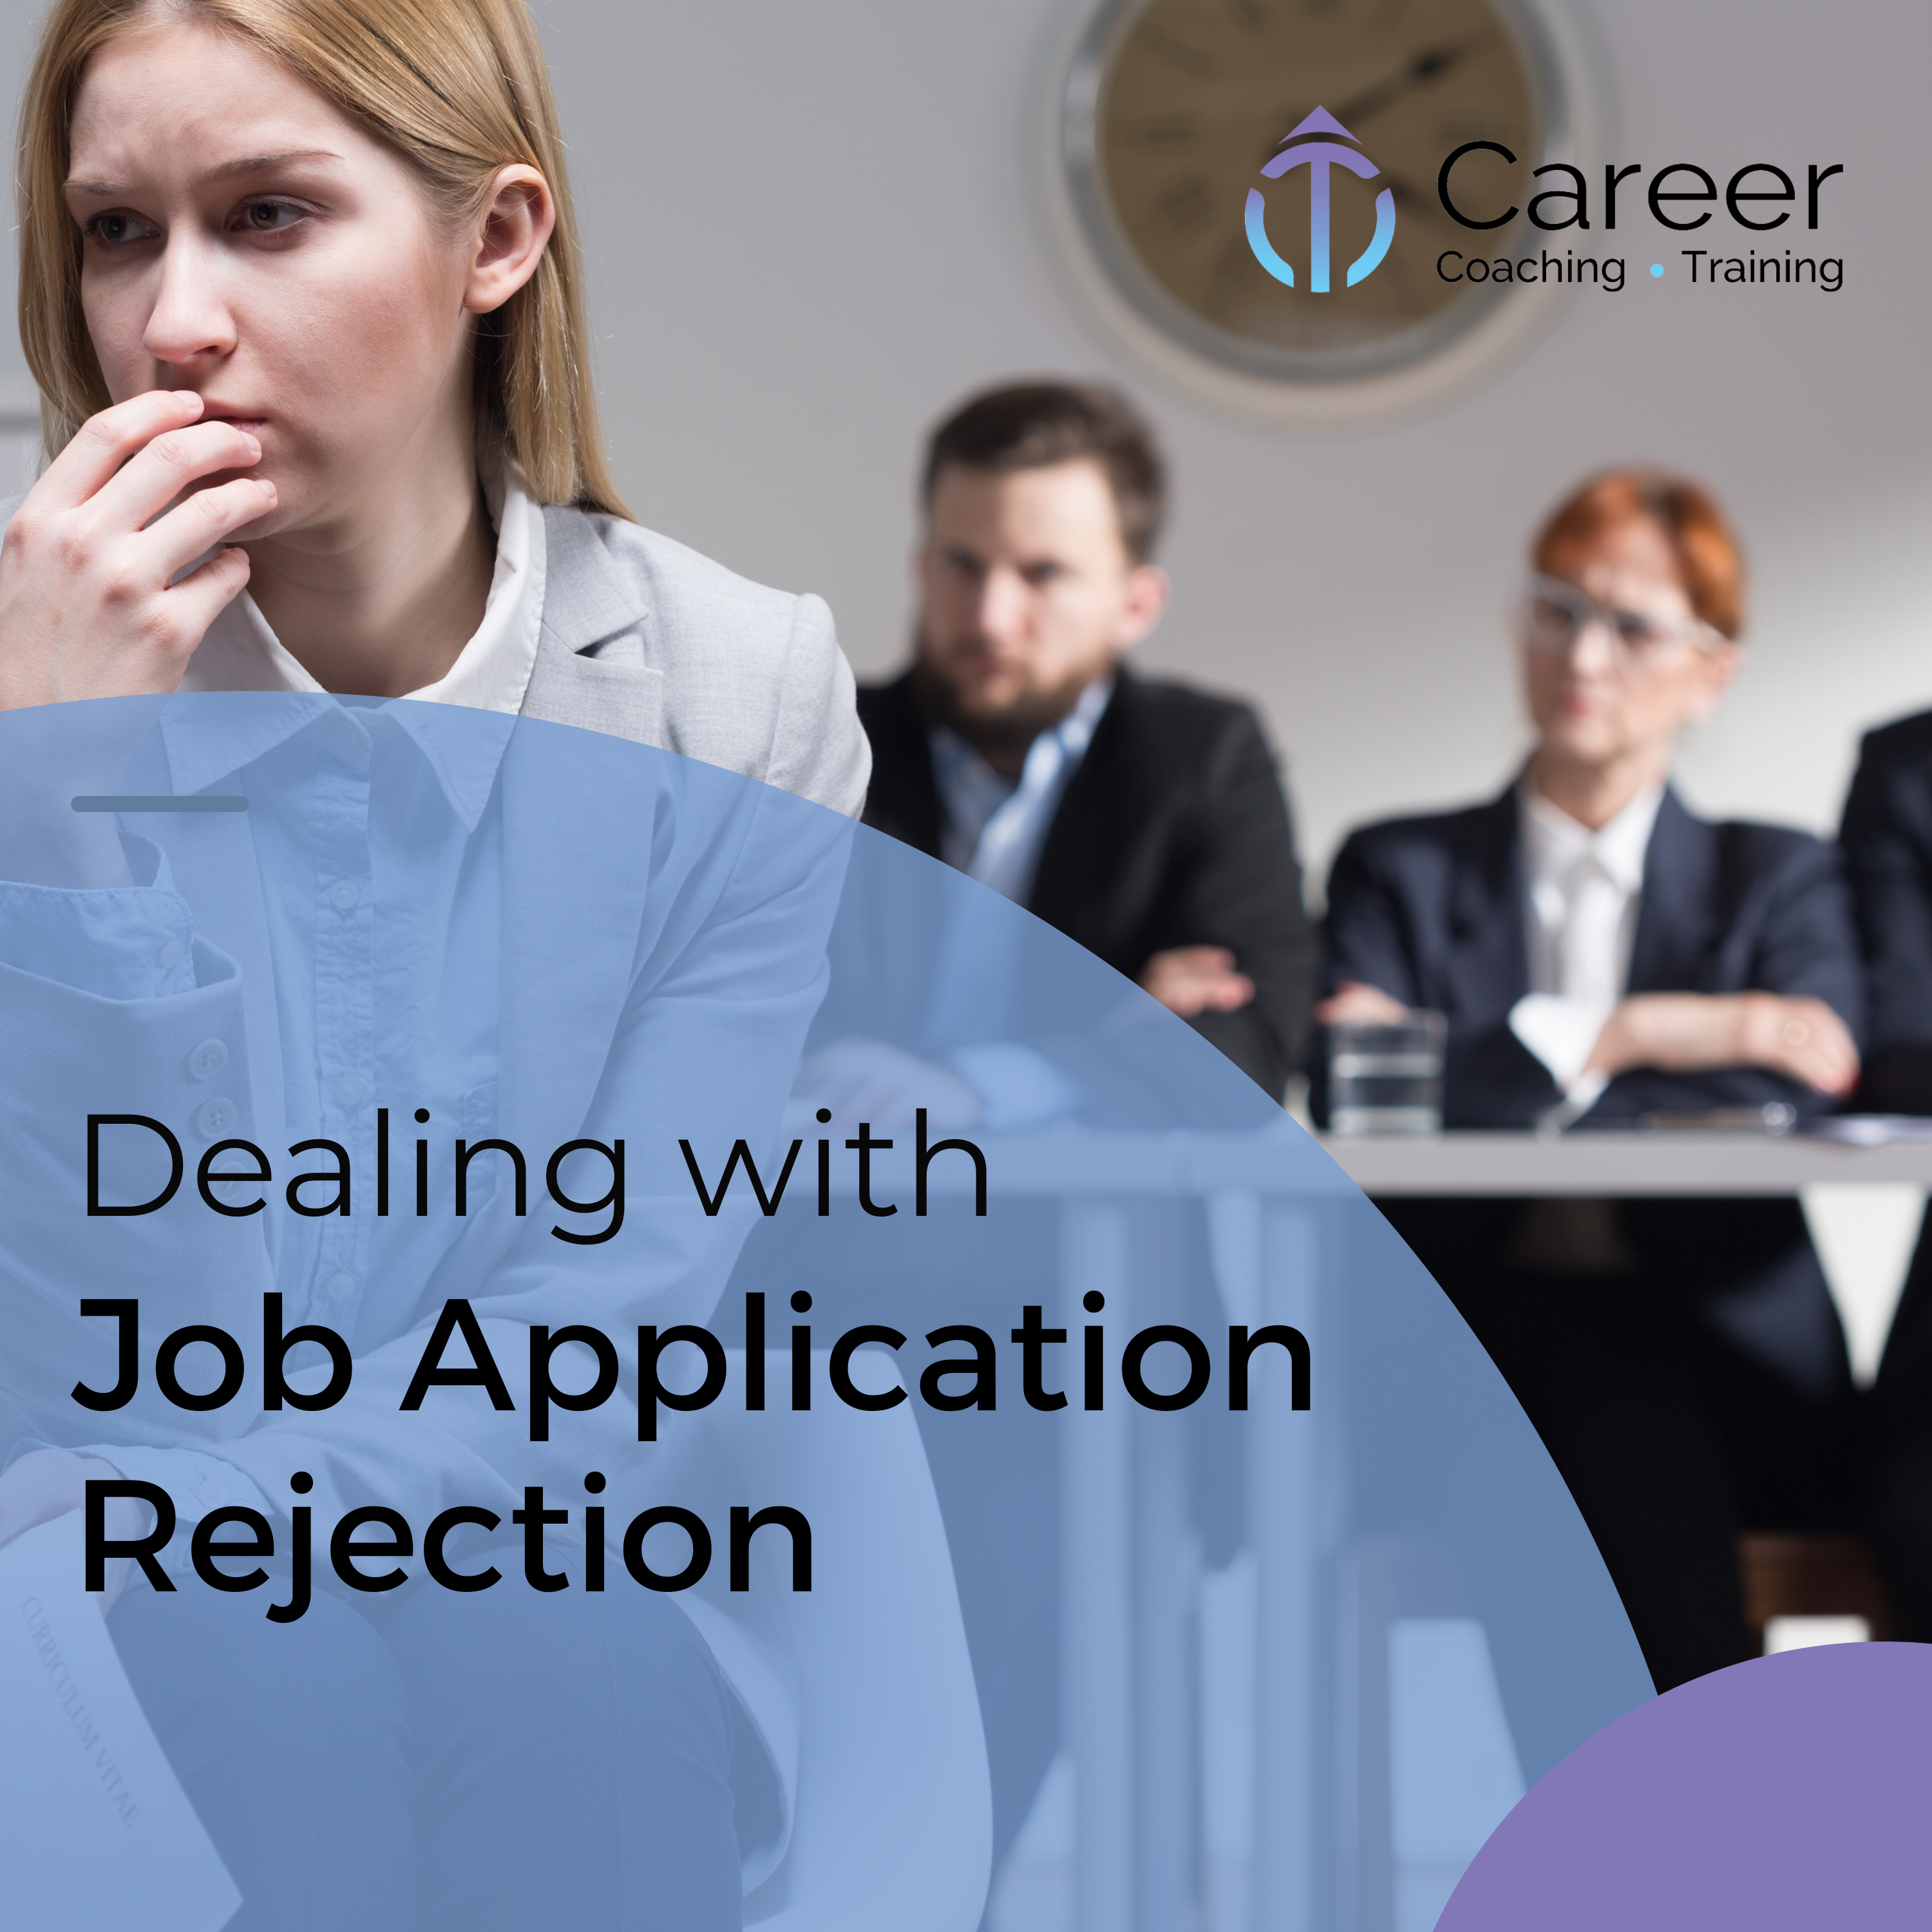 Dealing with Job Application Rejection